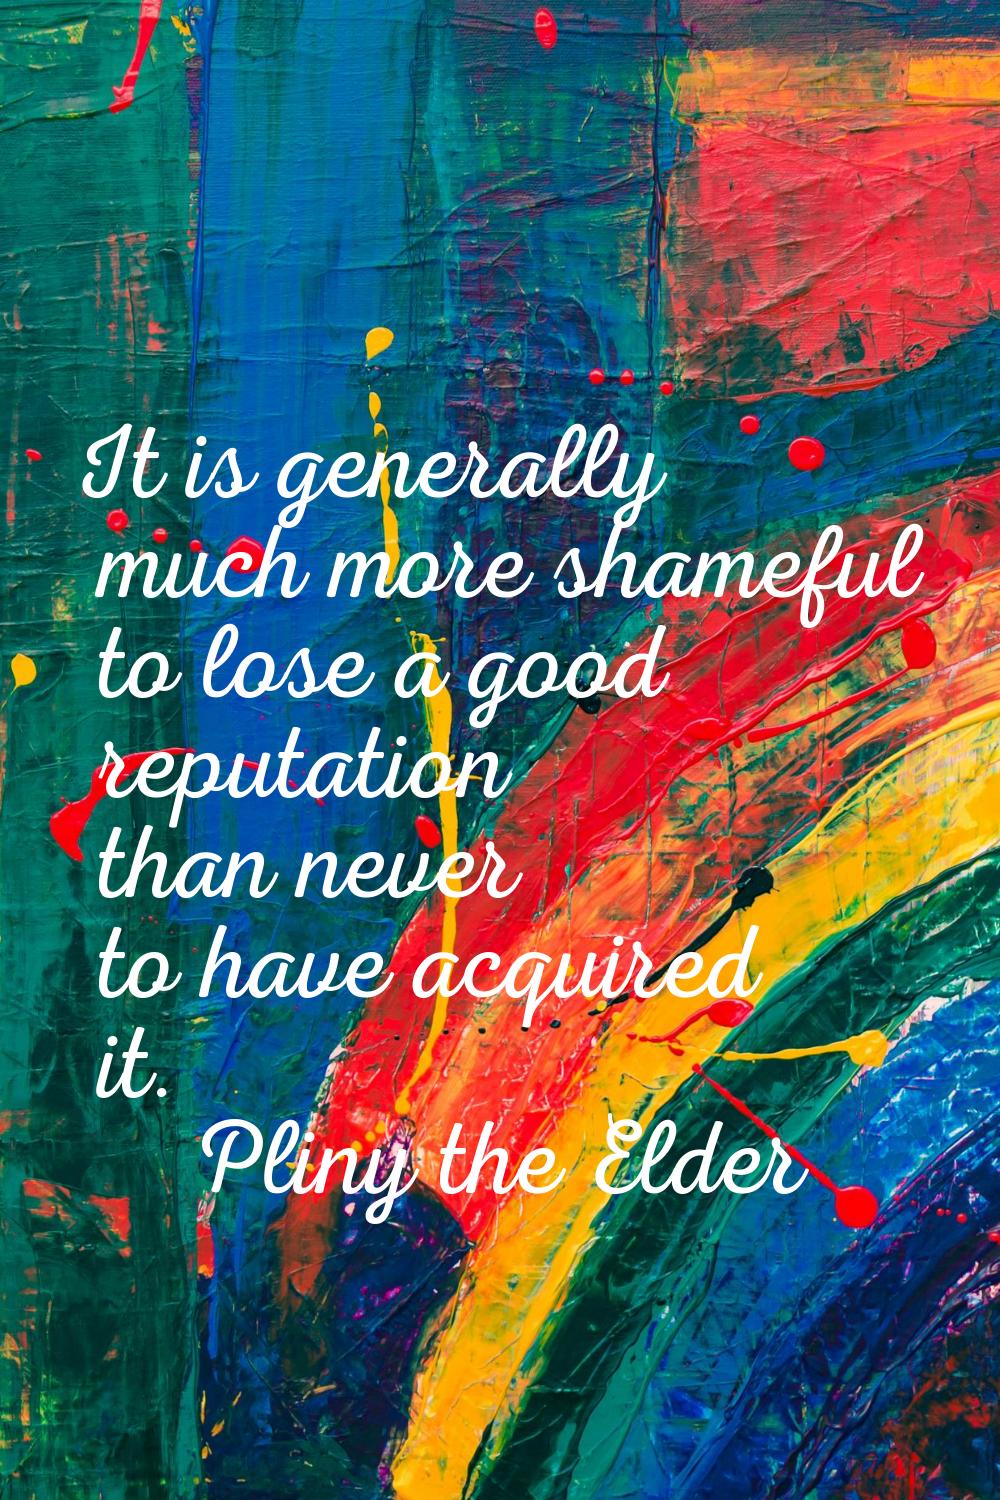 It is generally much more shameful to lose a good reputation than never to have acquired it.